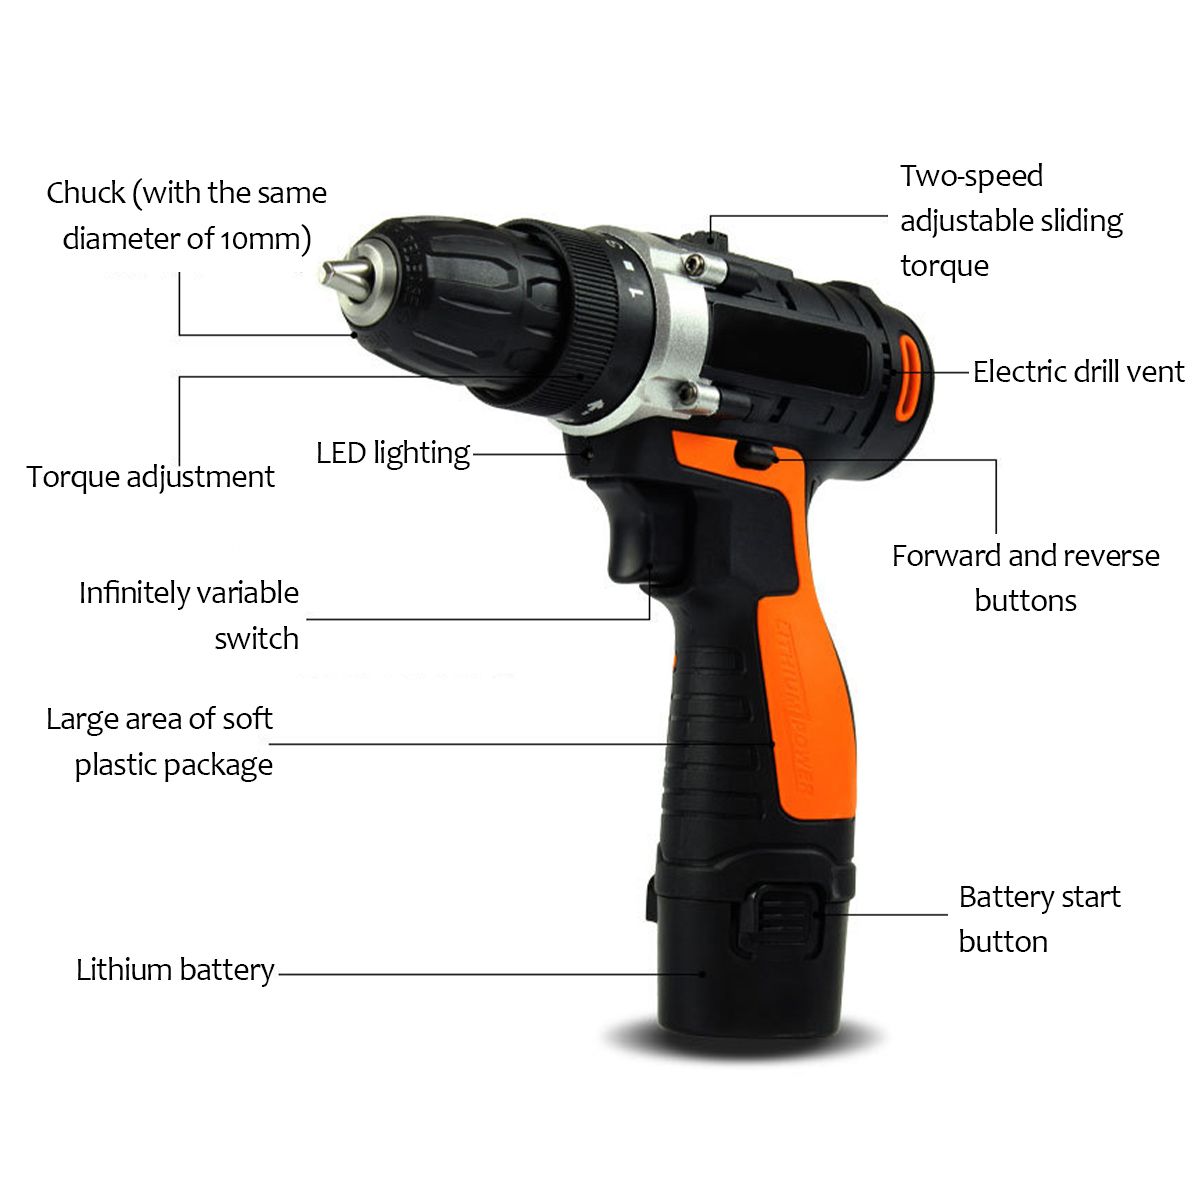 12V168V25V-Cordless-Impact-Drill-With-Toolcase-Precise-Control-Waterproof-Electric-Drill-For-Drillin-1700374